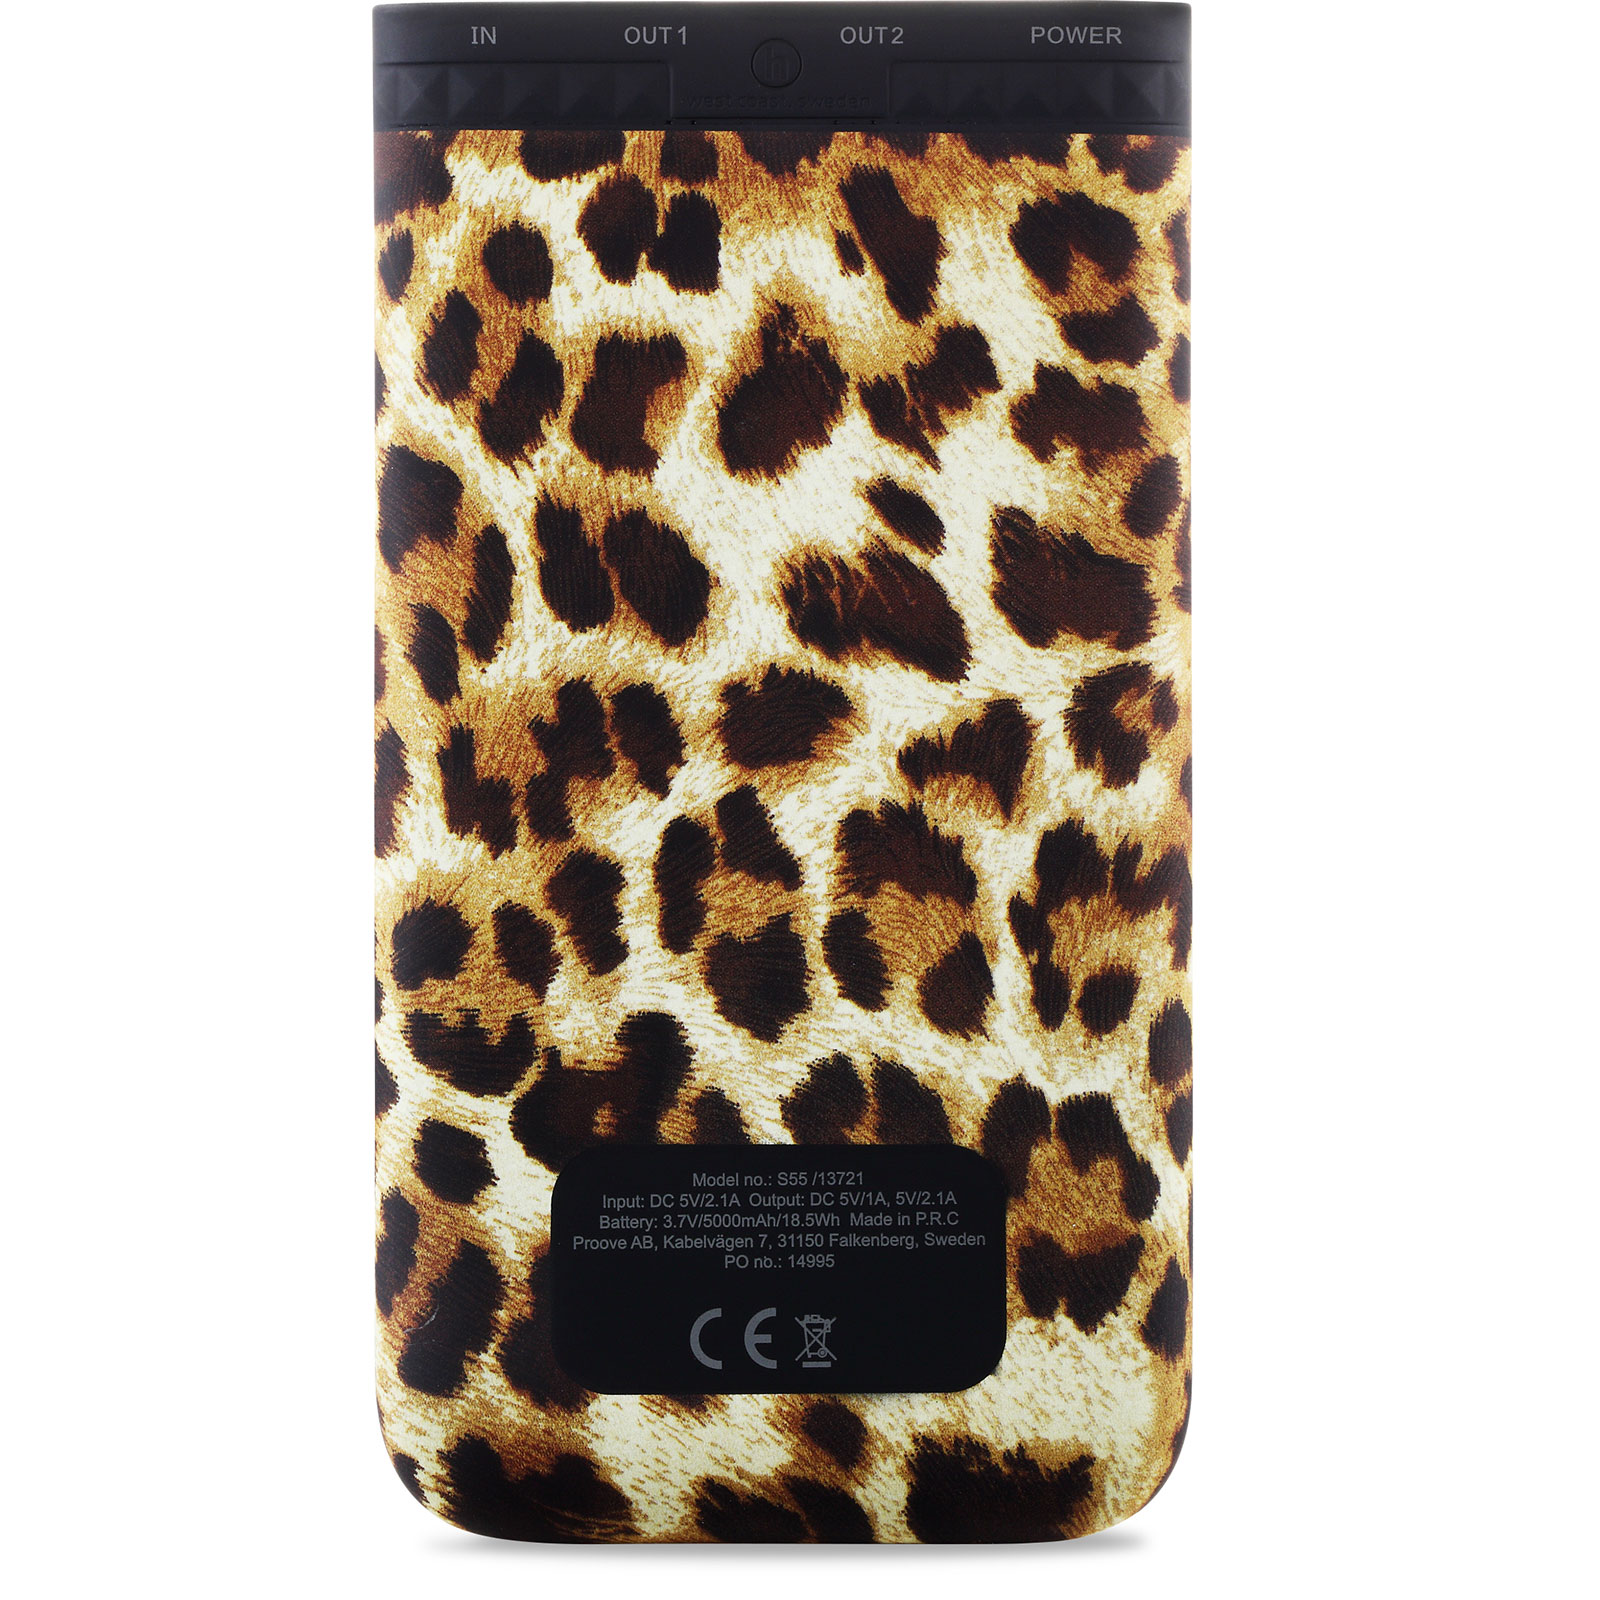 Portable charger, style 5000mAh, leo love